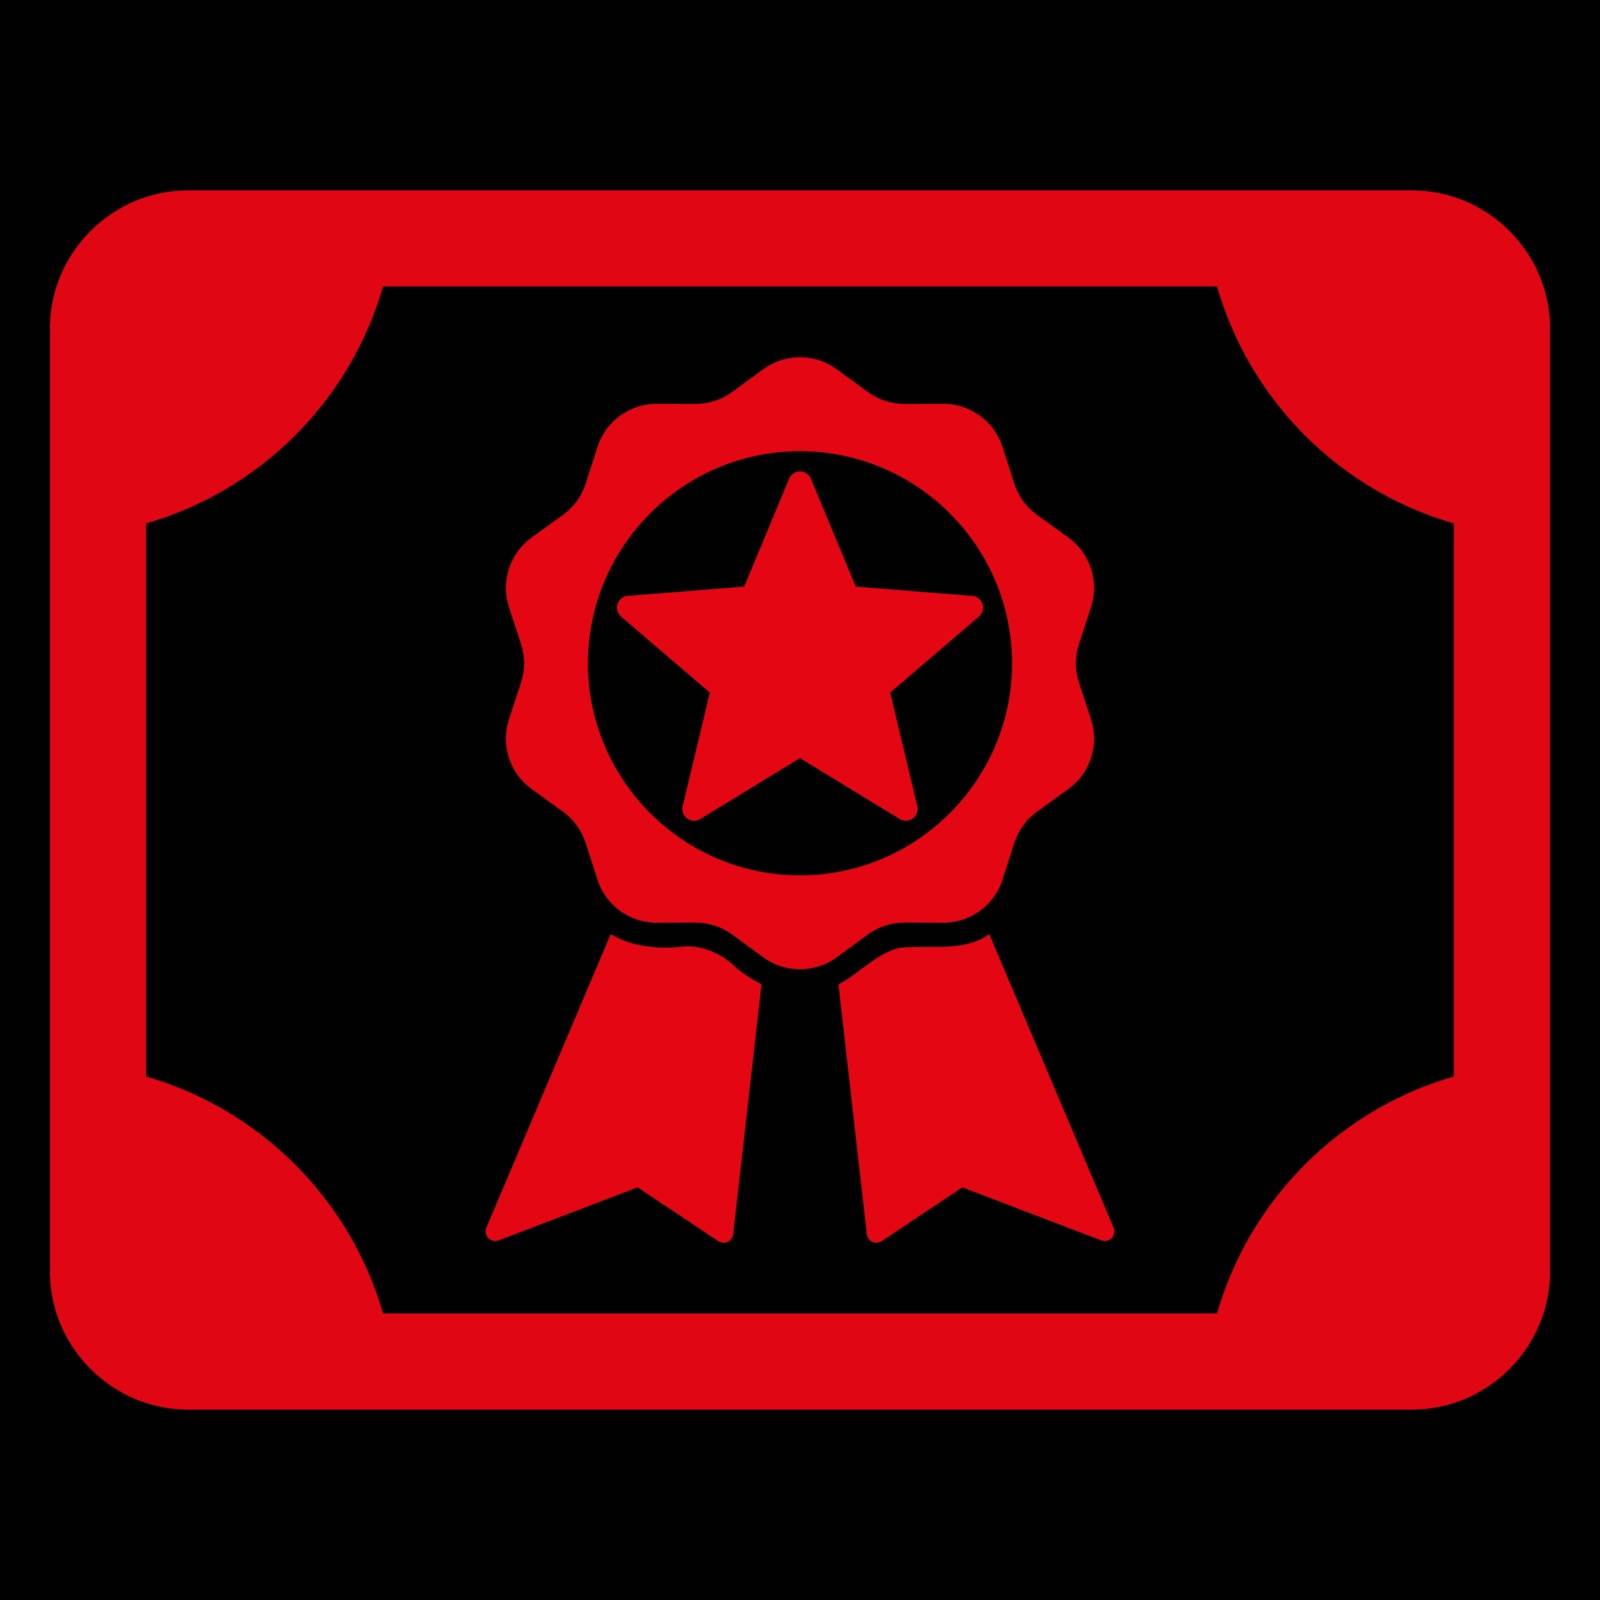 Award Diploma vector icon. Style is flat symbol, red color, rounded angles, black background.